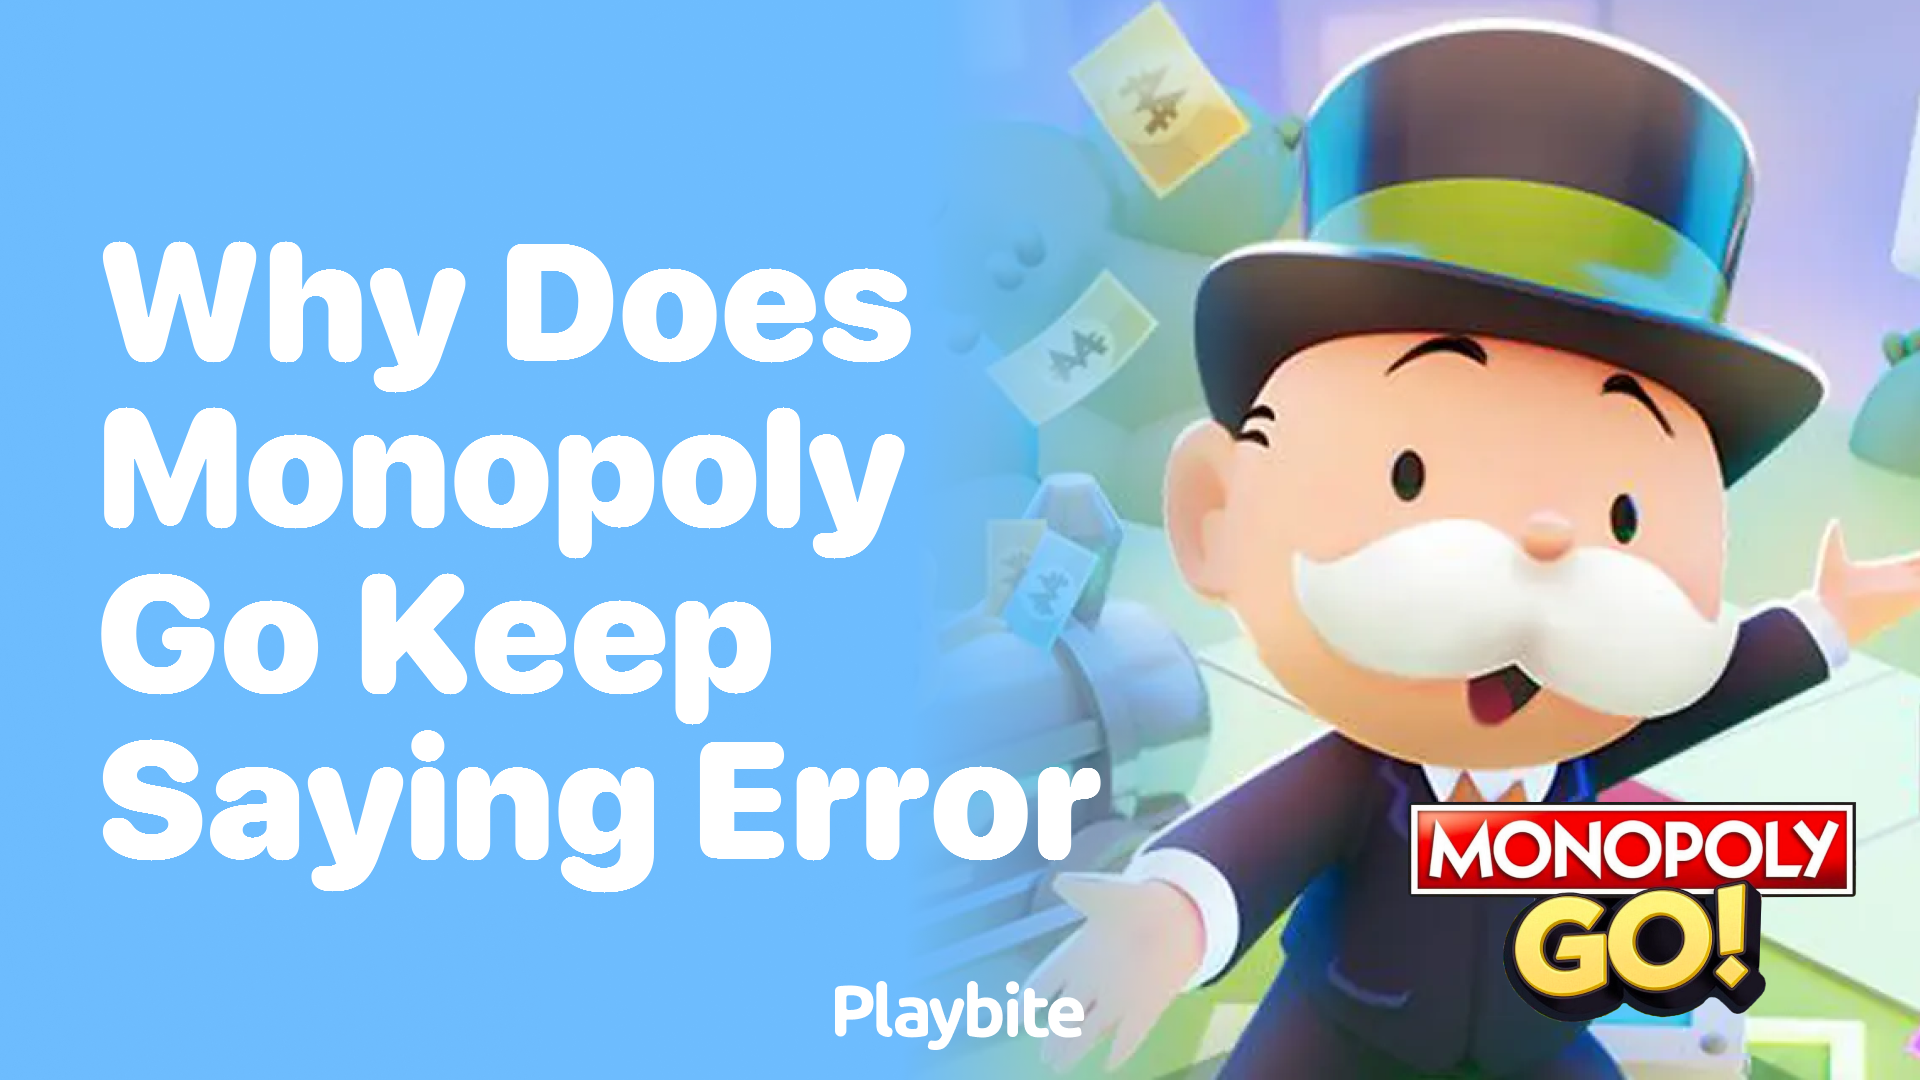 Why Does Monopoly Go Keep Saying Error? Let&#8217;s Find Out!